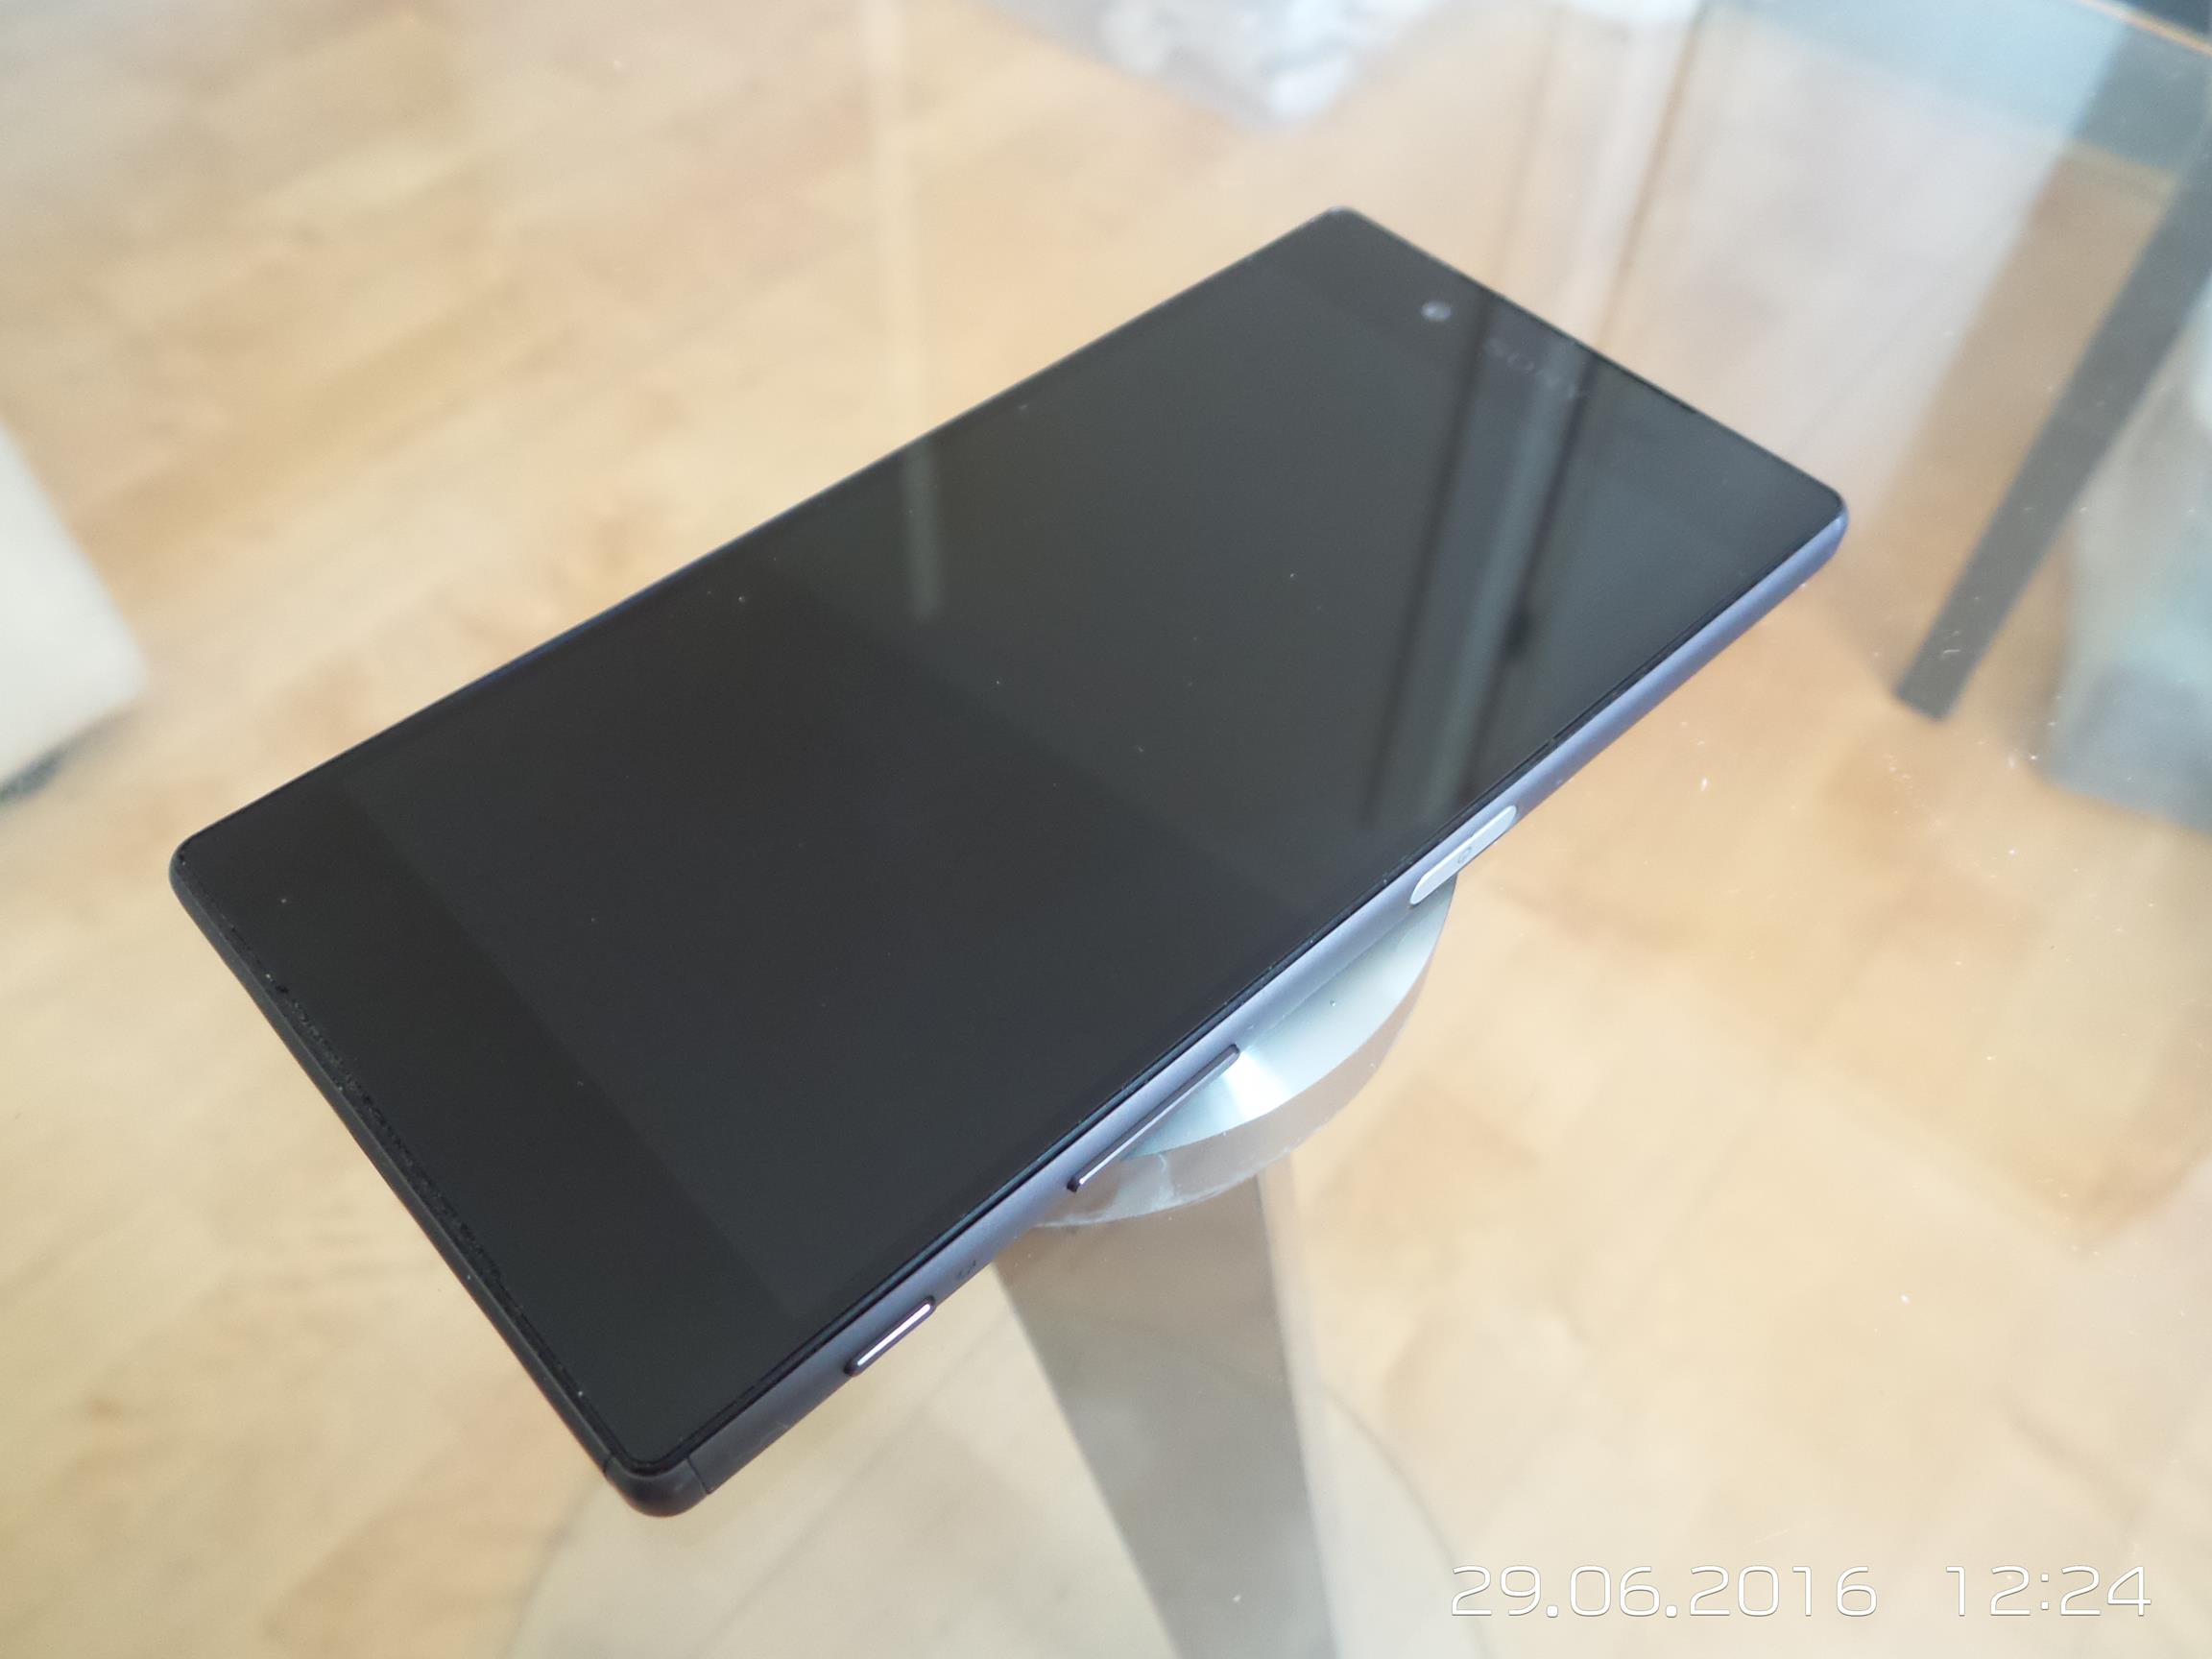 Sony Xperia Z5 Quick Review by mark2410